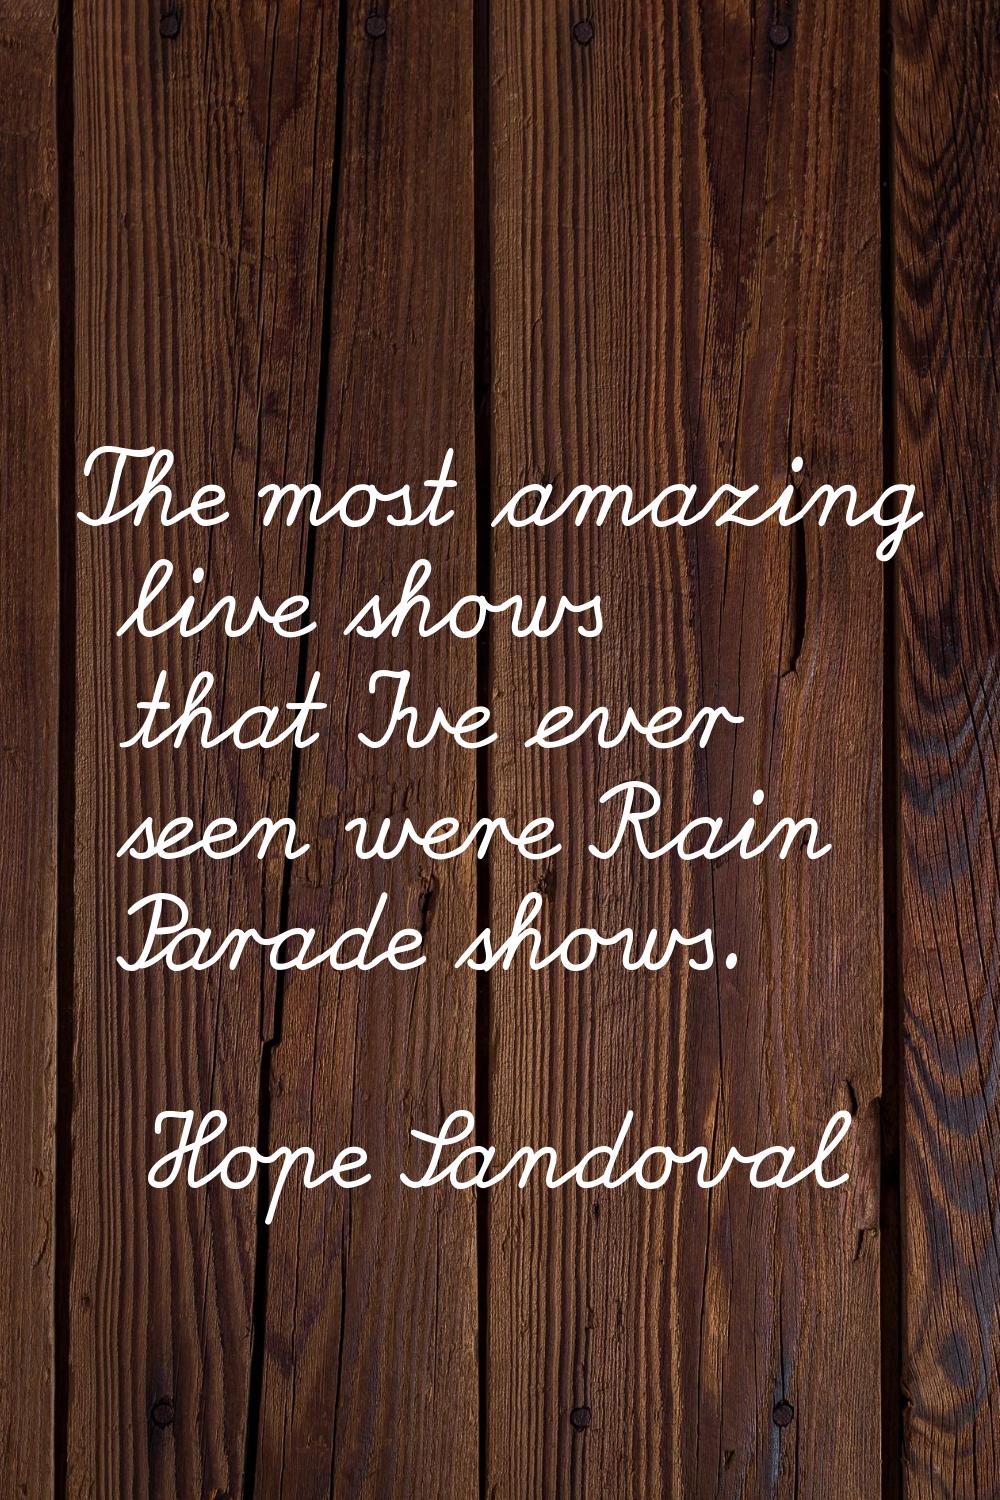 The most amazing live shows that I've ever seen were Rain Parade shows.